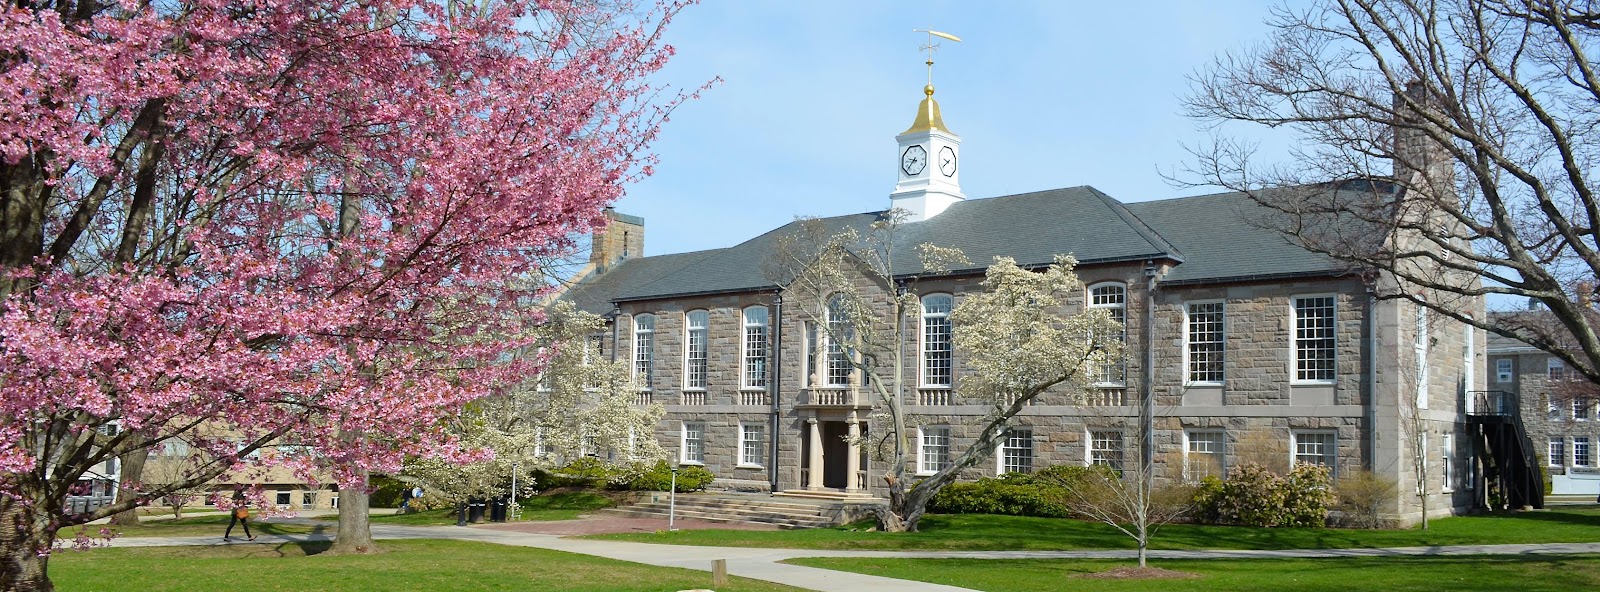 View of the campus of the University of Rhode Island